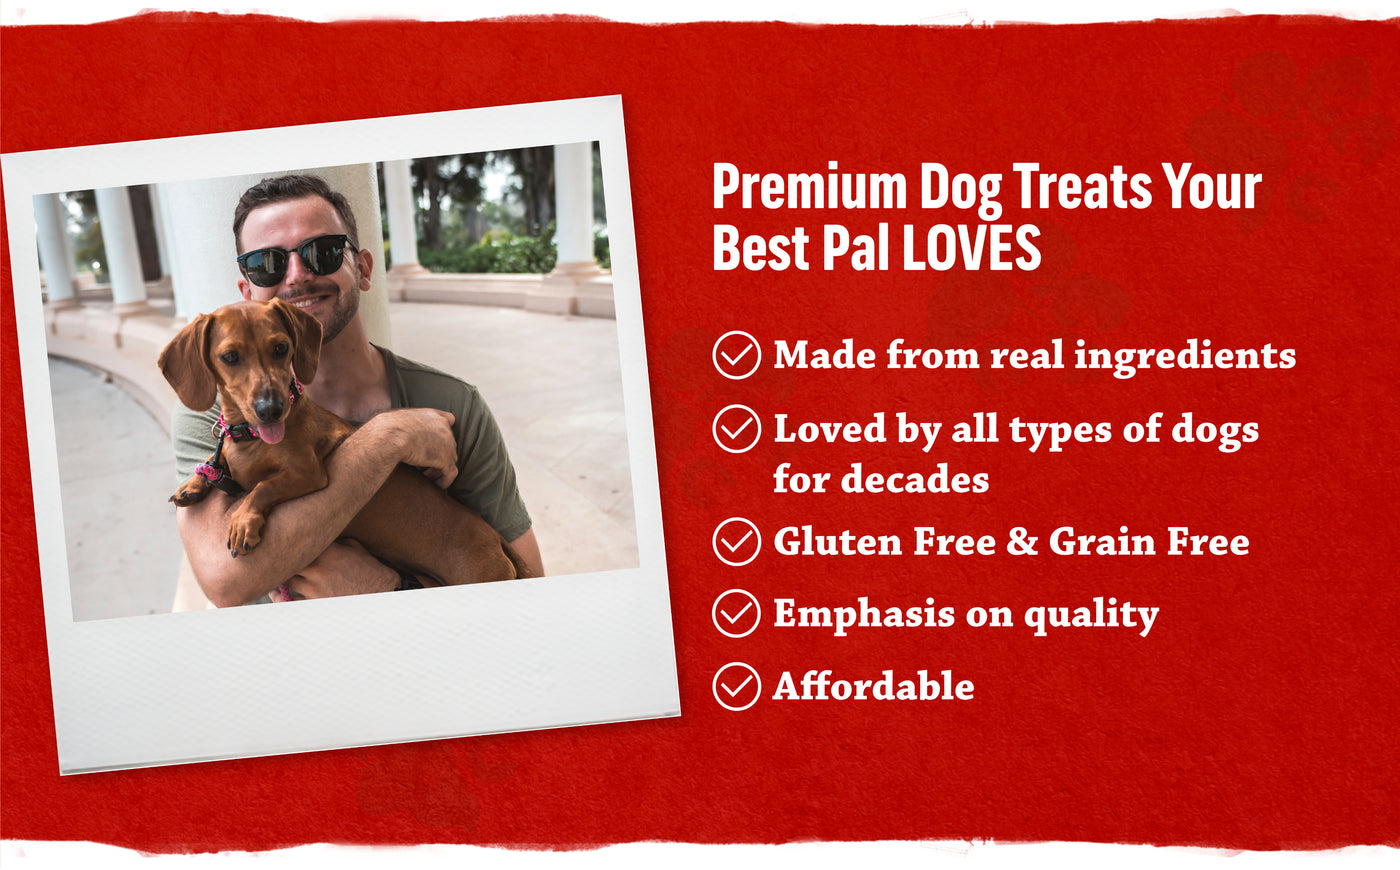 Premium Dog Treats Your Best Pal LOVES, Made from real ingredients, Loved by all types of dogs for decades, Gluten Free & Grain Free Emphasis on quality,Affordable